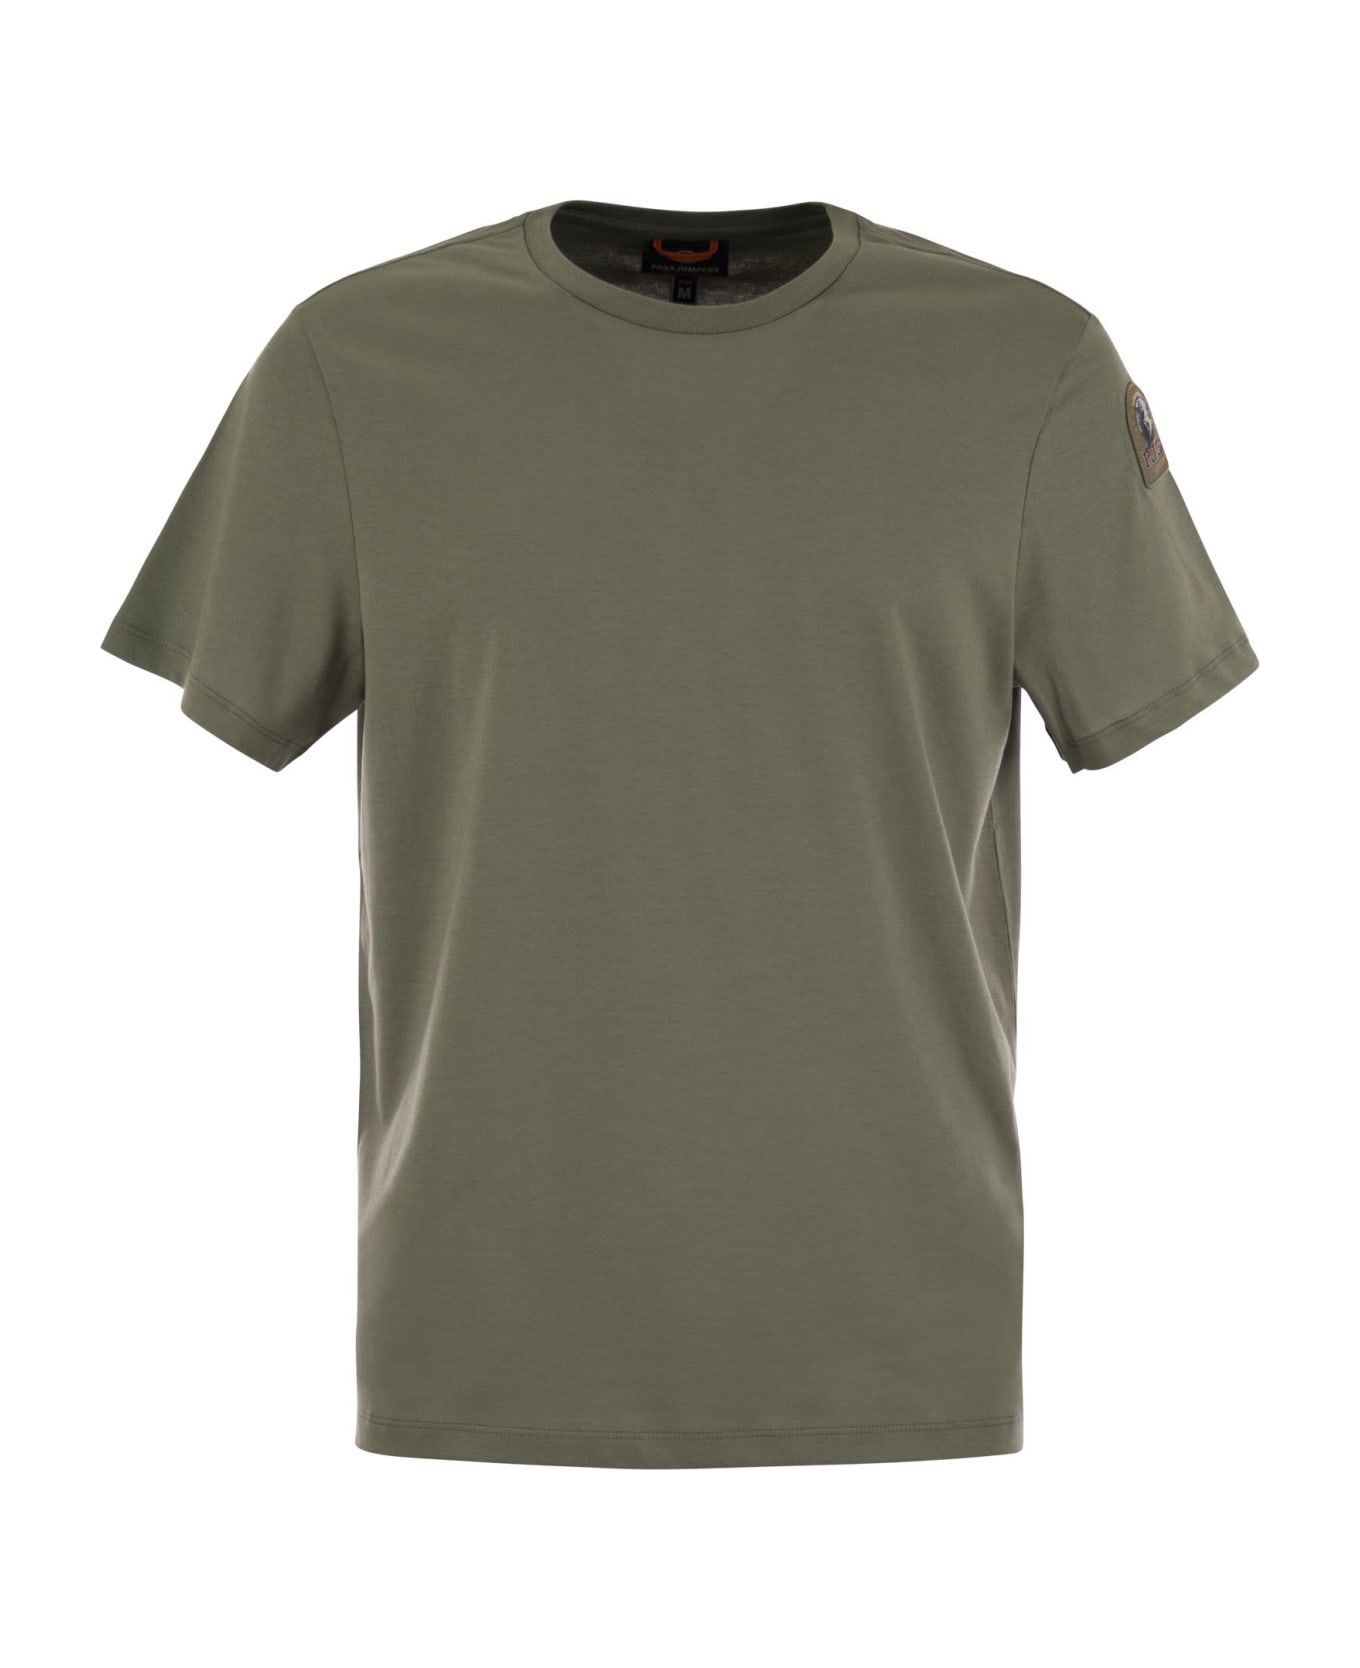 Parajumpers Shispare Tee - Cotton Jersey T-shirt - Military Green